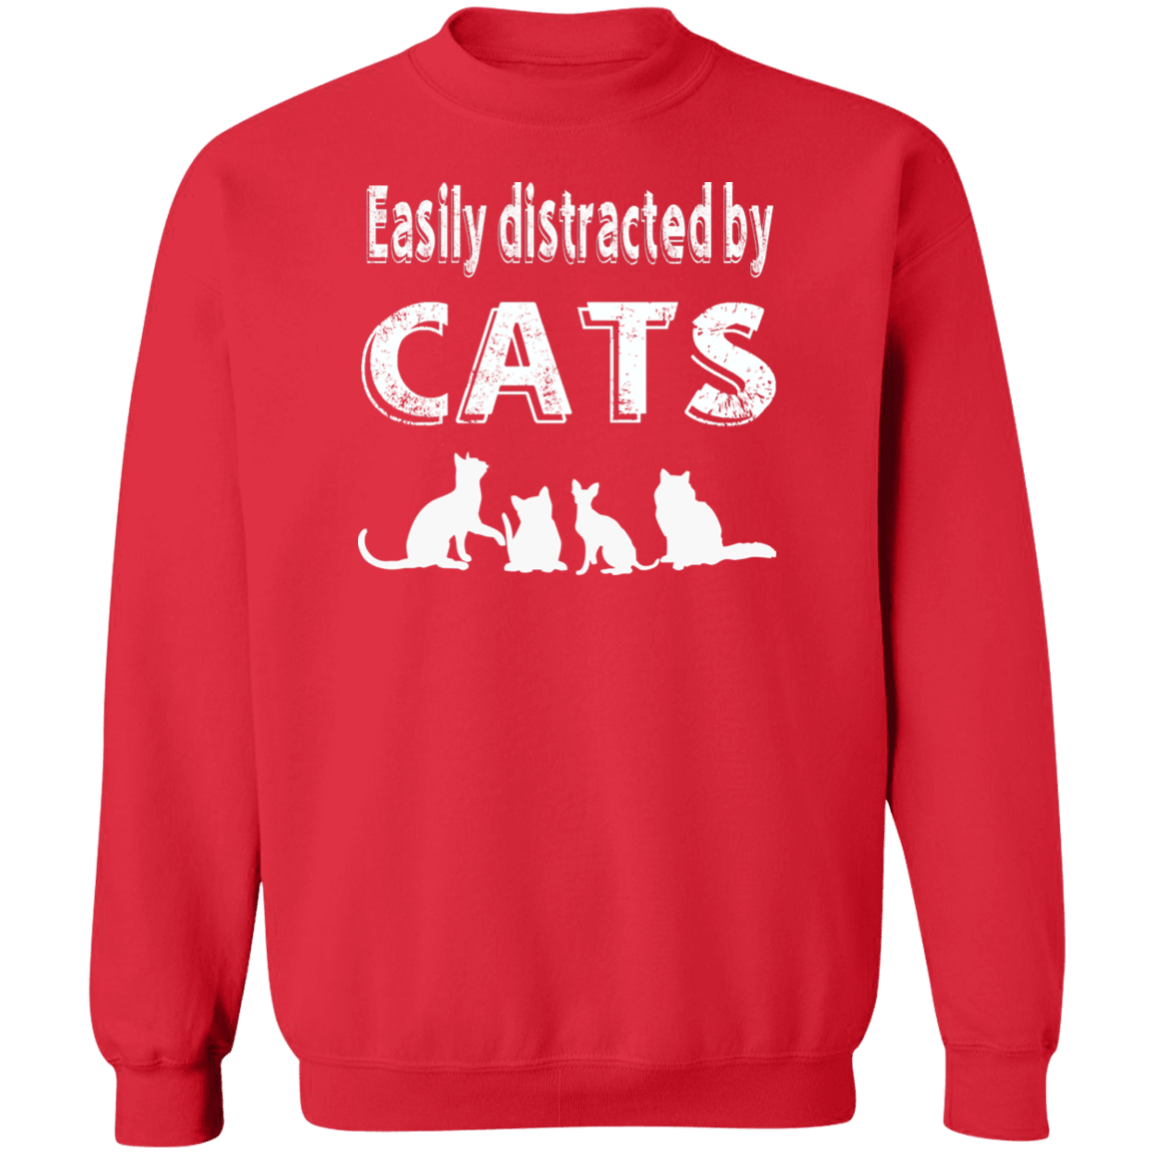 Easily Distracted By Cats - Sweatshirt Rescuers Club